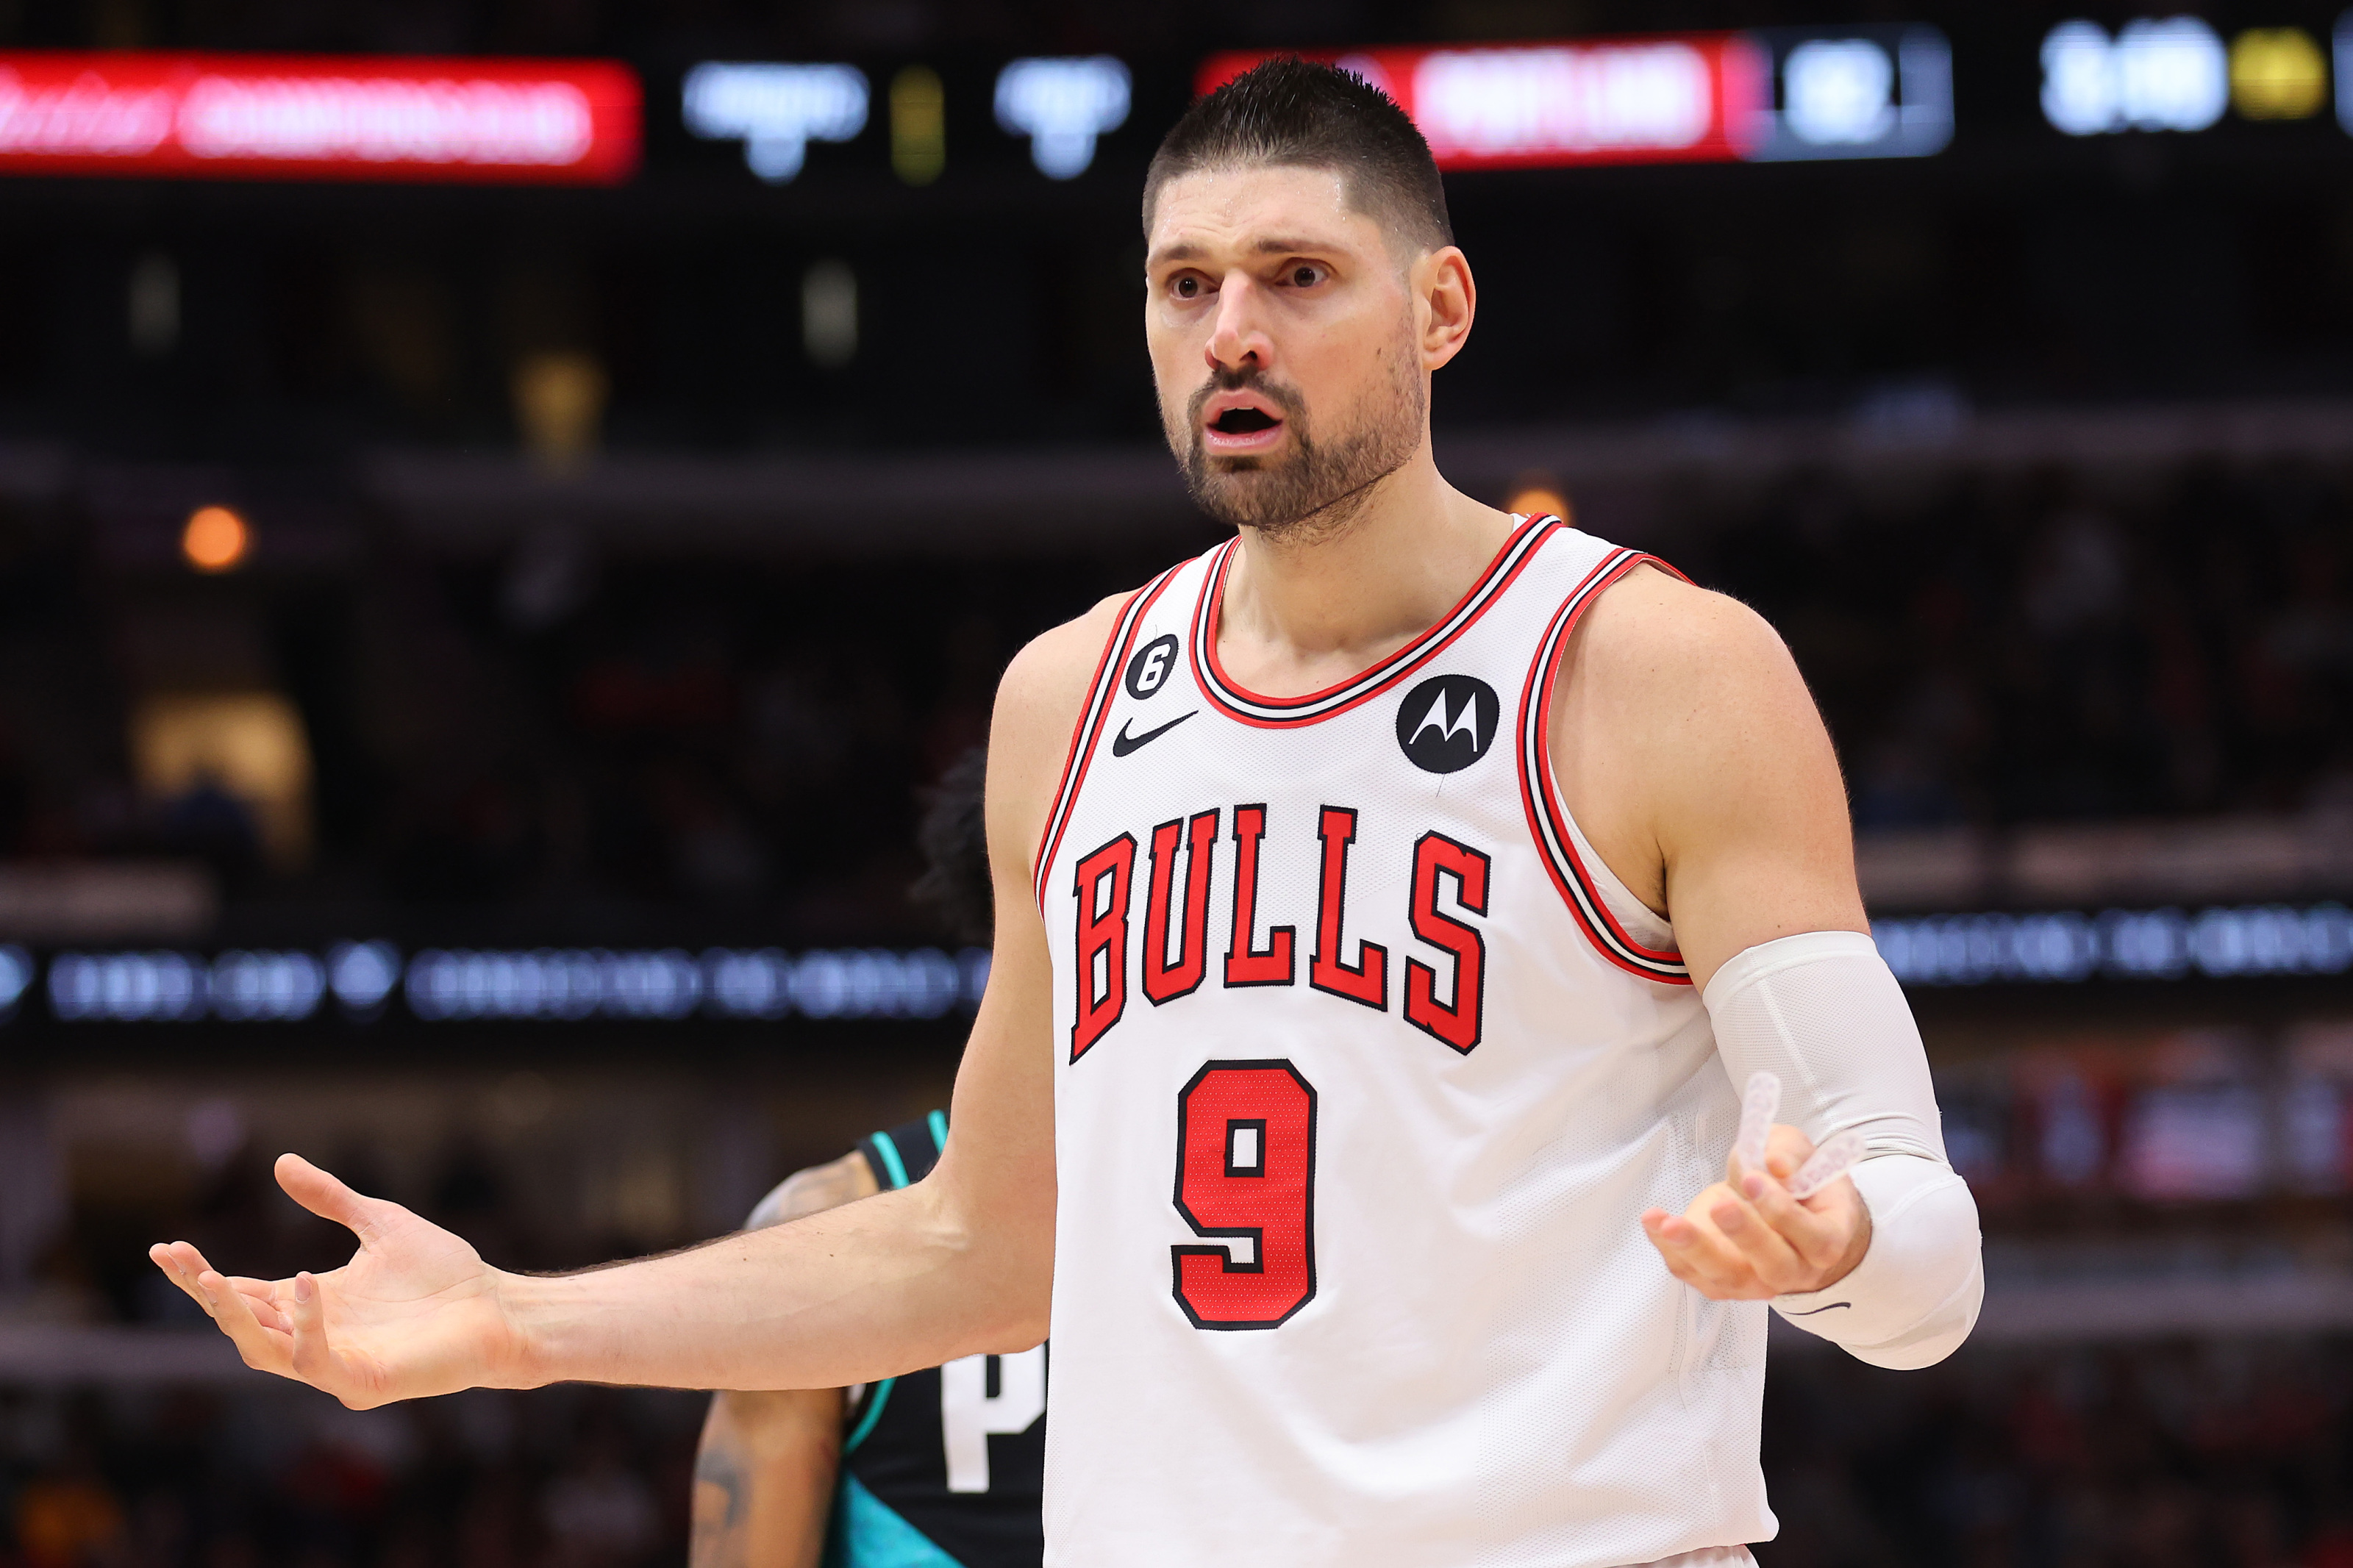 Nikola Vucevic is having the best season no one is talking about